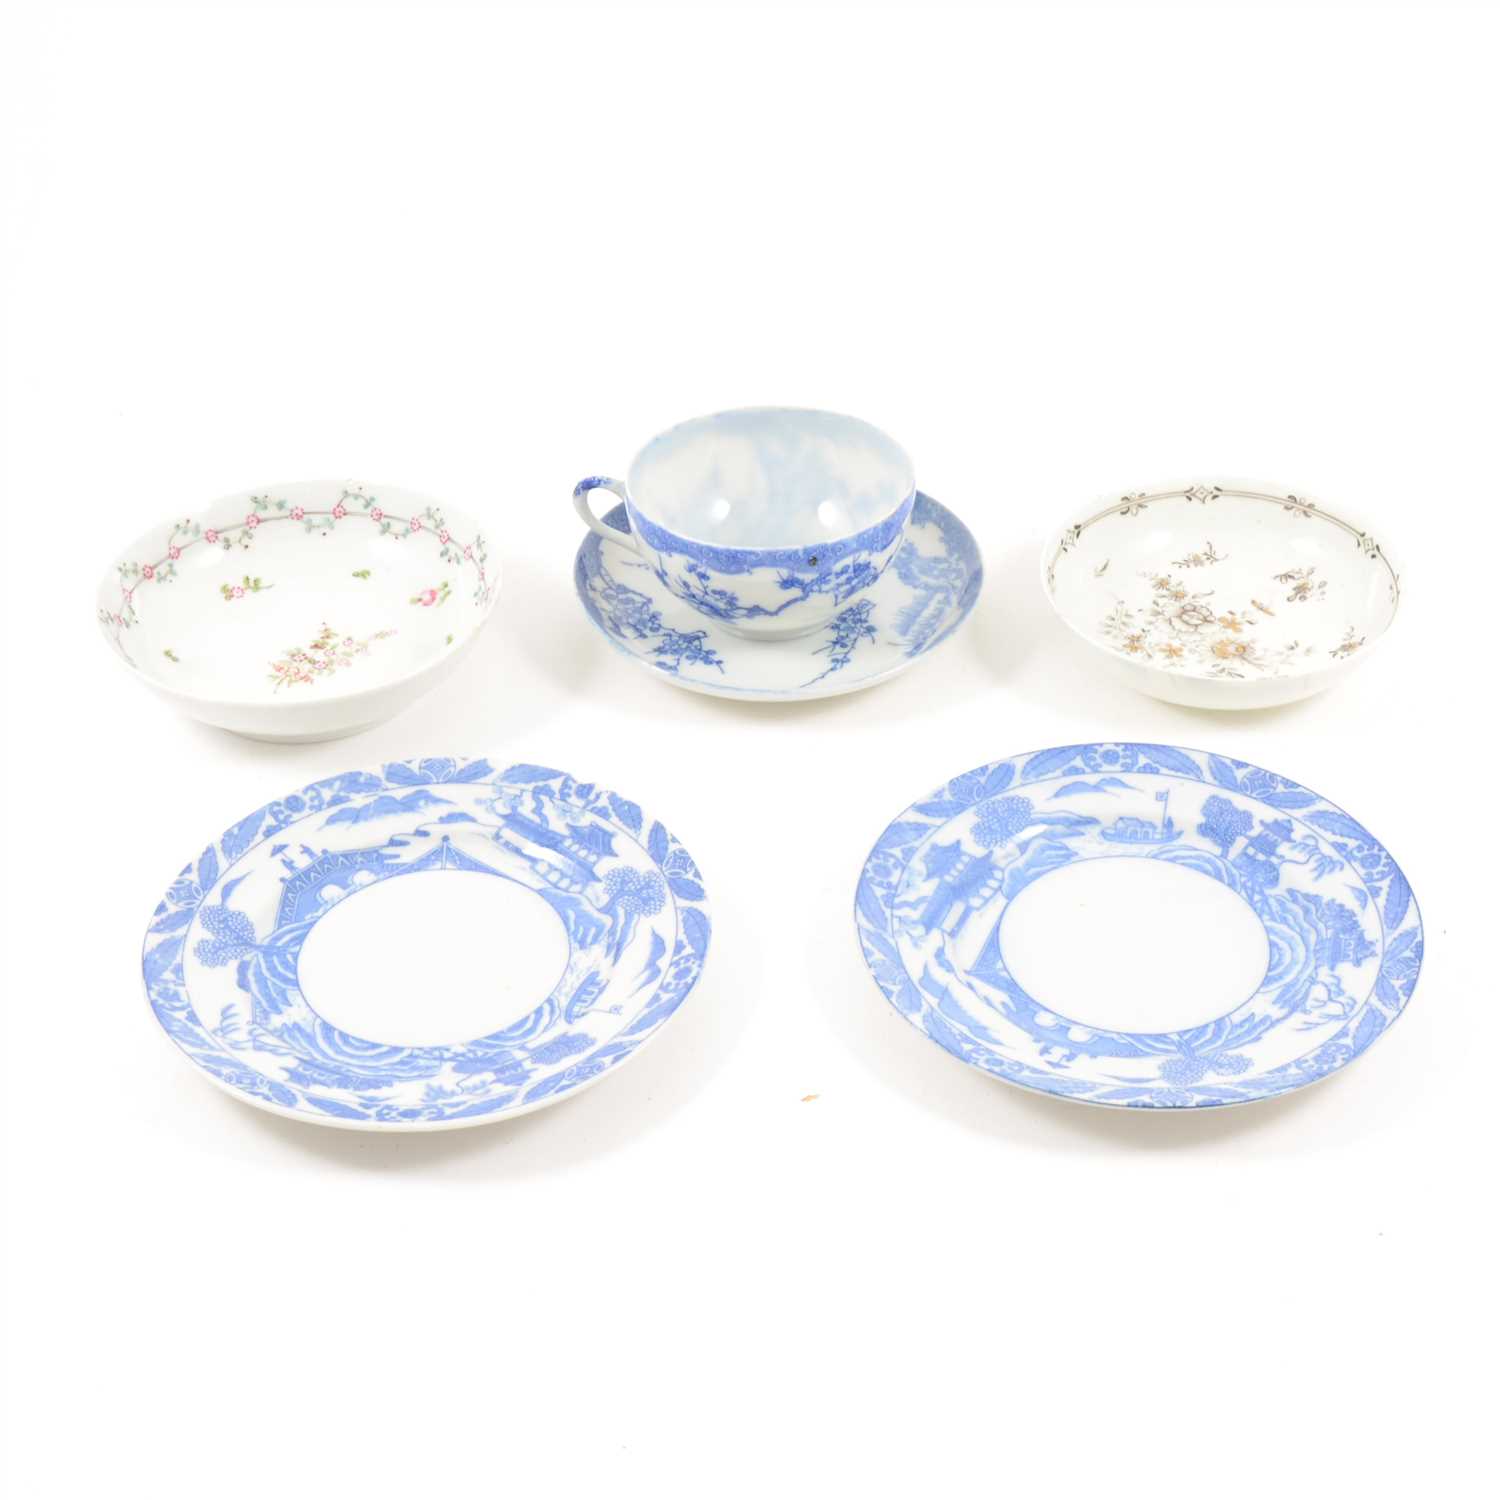 Lot 11 - A late Chinese blue and white cup and saucer, and a collection of English porcelain saucers